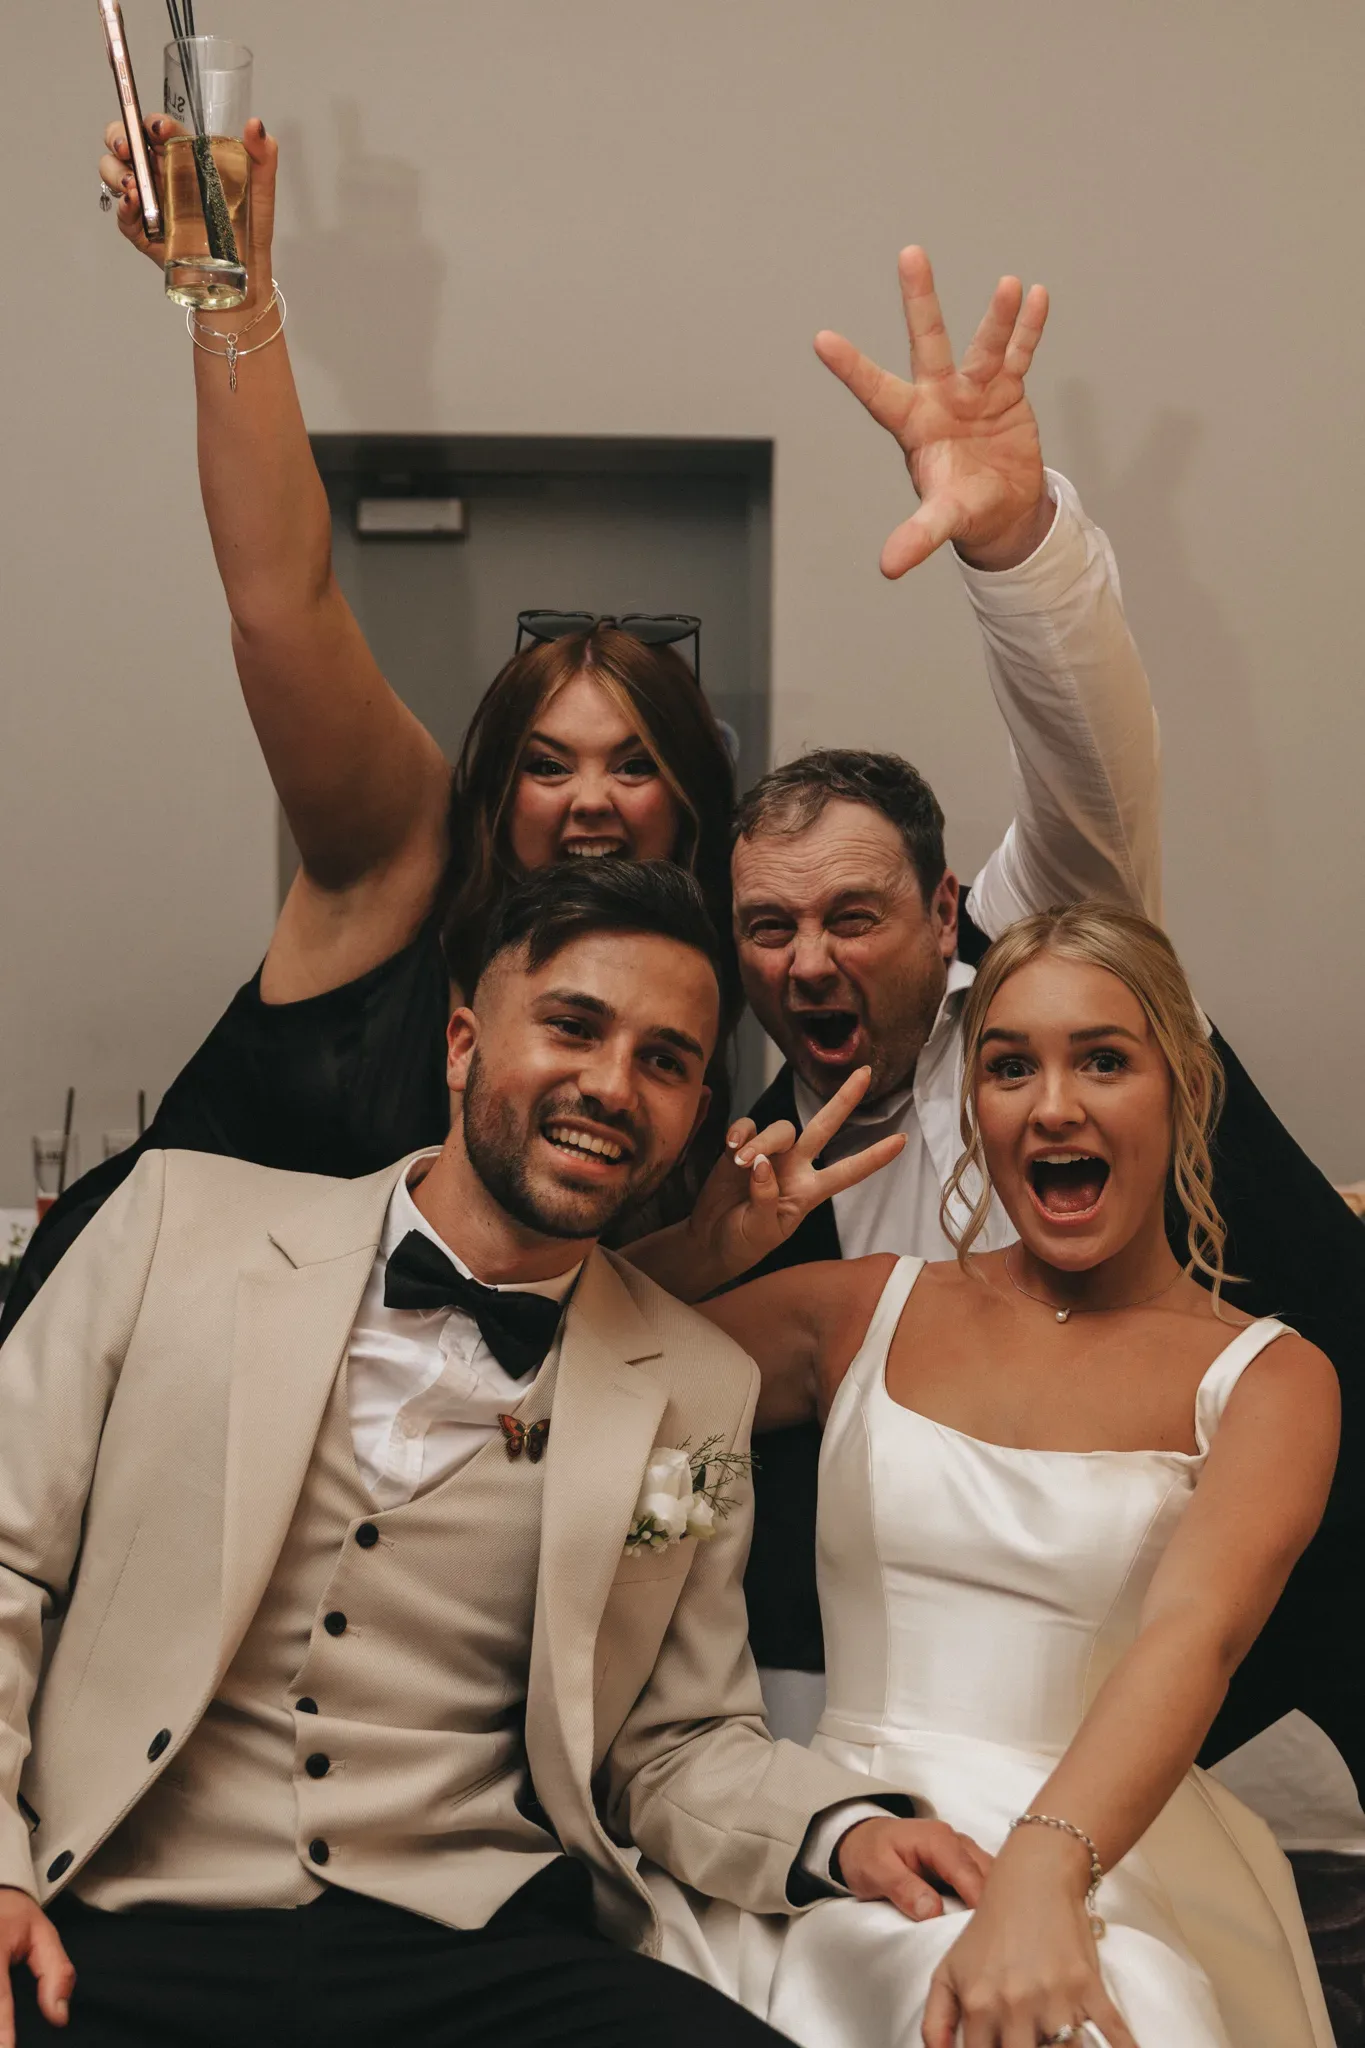 A joyful group of four at a wedding, with a bride and groom in the front and two guests behind them. everyone is smiling and making playful gestures, the groom in a white tuxedo and the bride in a white dress.